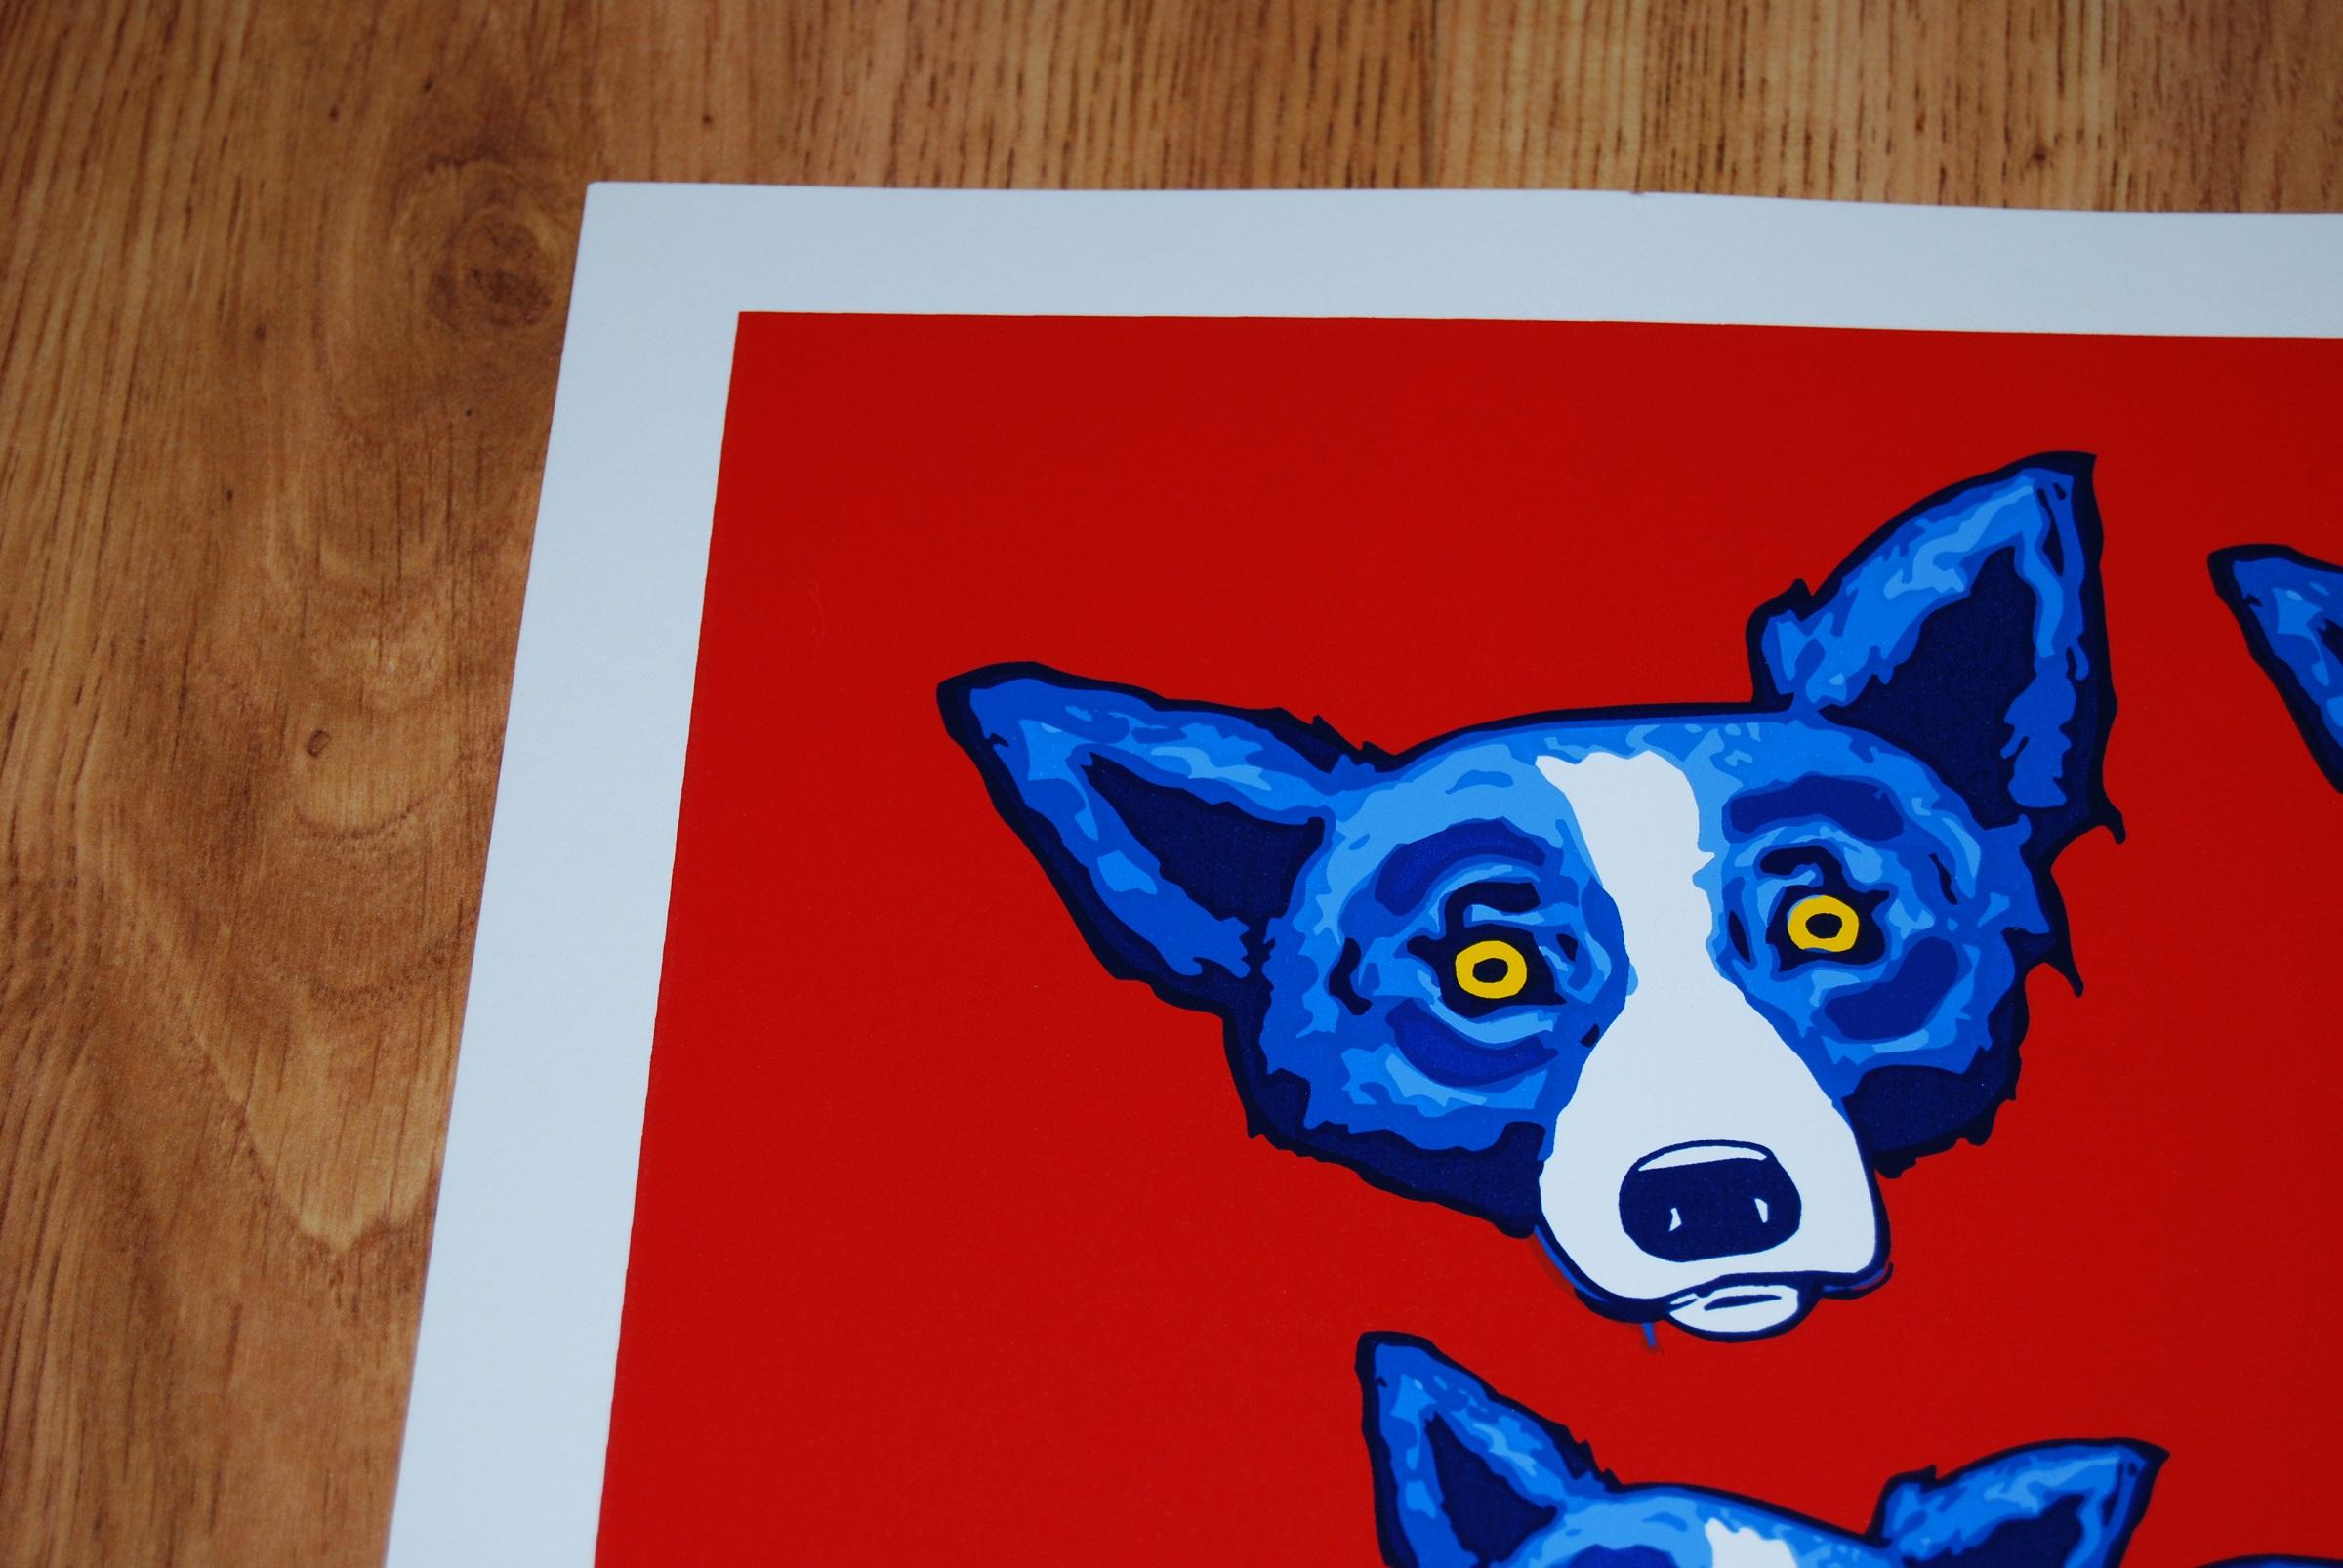 Original Group Therapy Red - Remarqued Signed Silkscreen Blue Dog Print 2